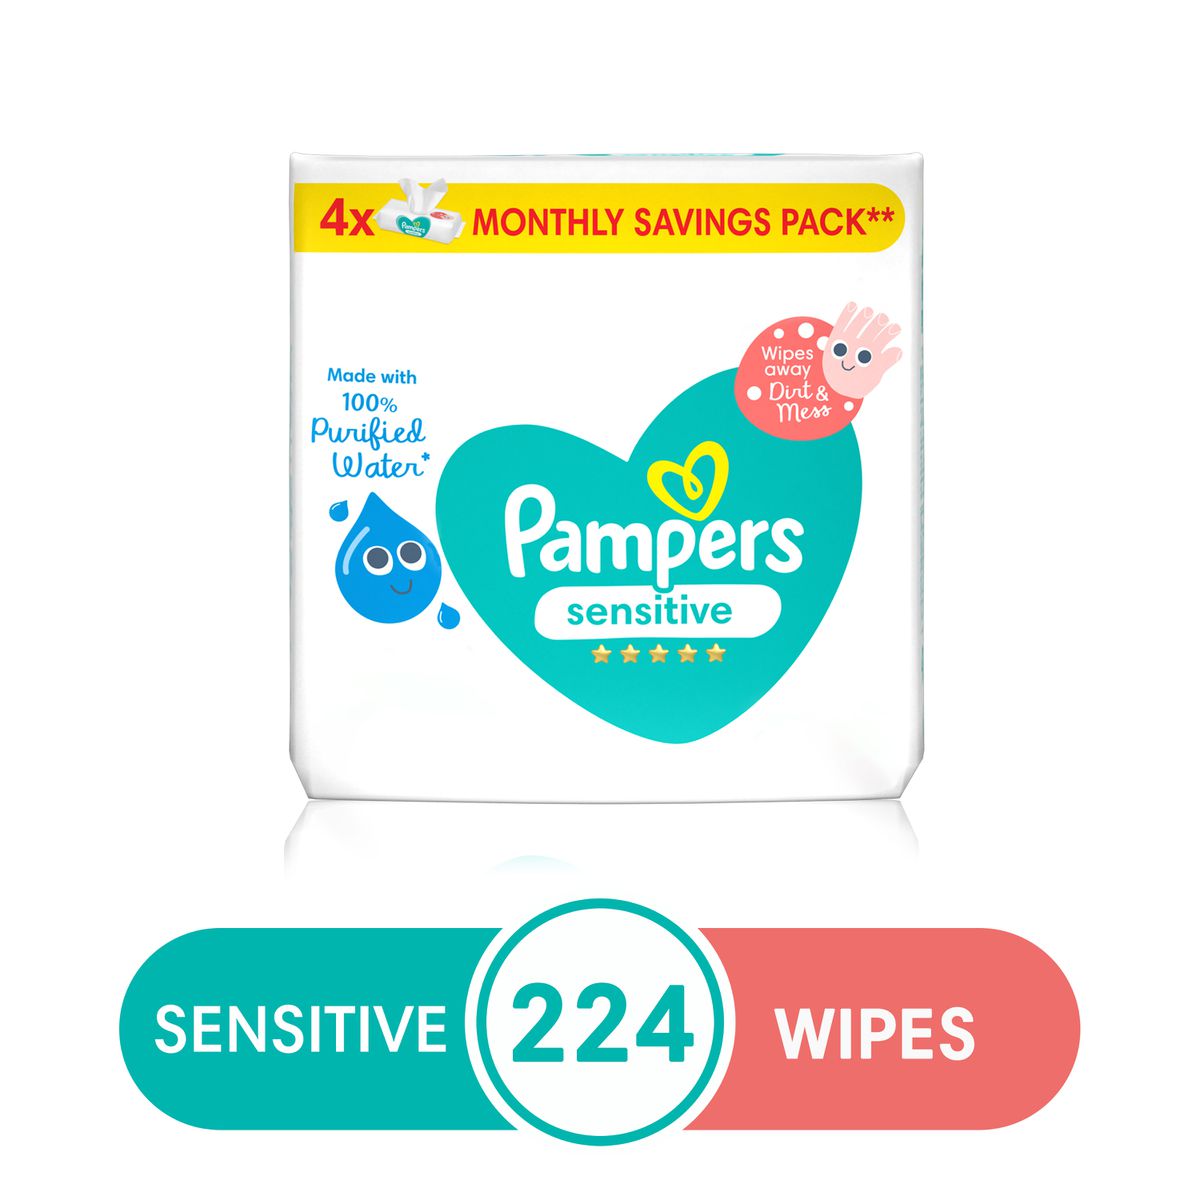 Pampers Sensitive Wipes - 224 (4x56) - 100% Purified Water Wipes